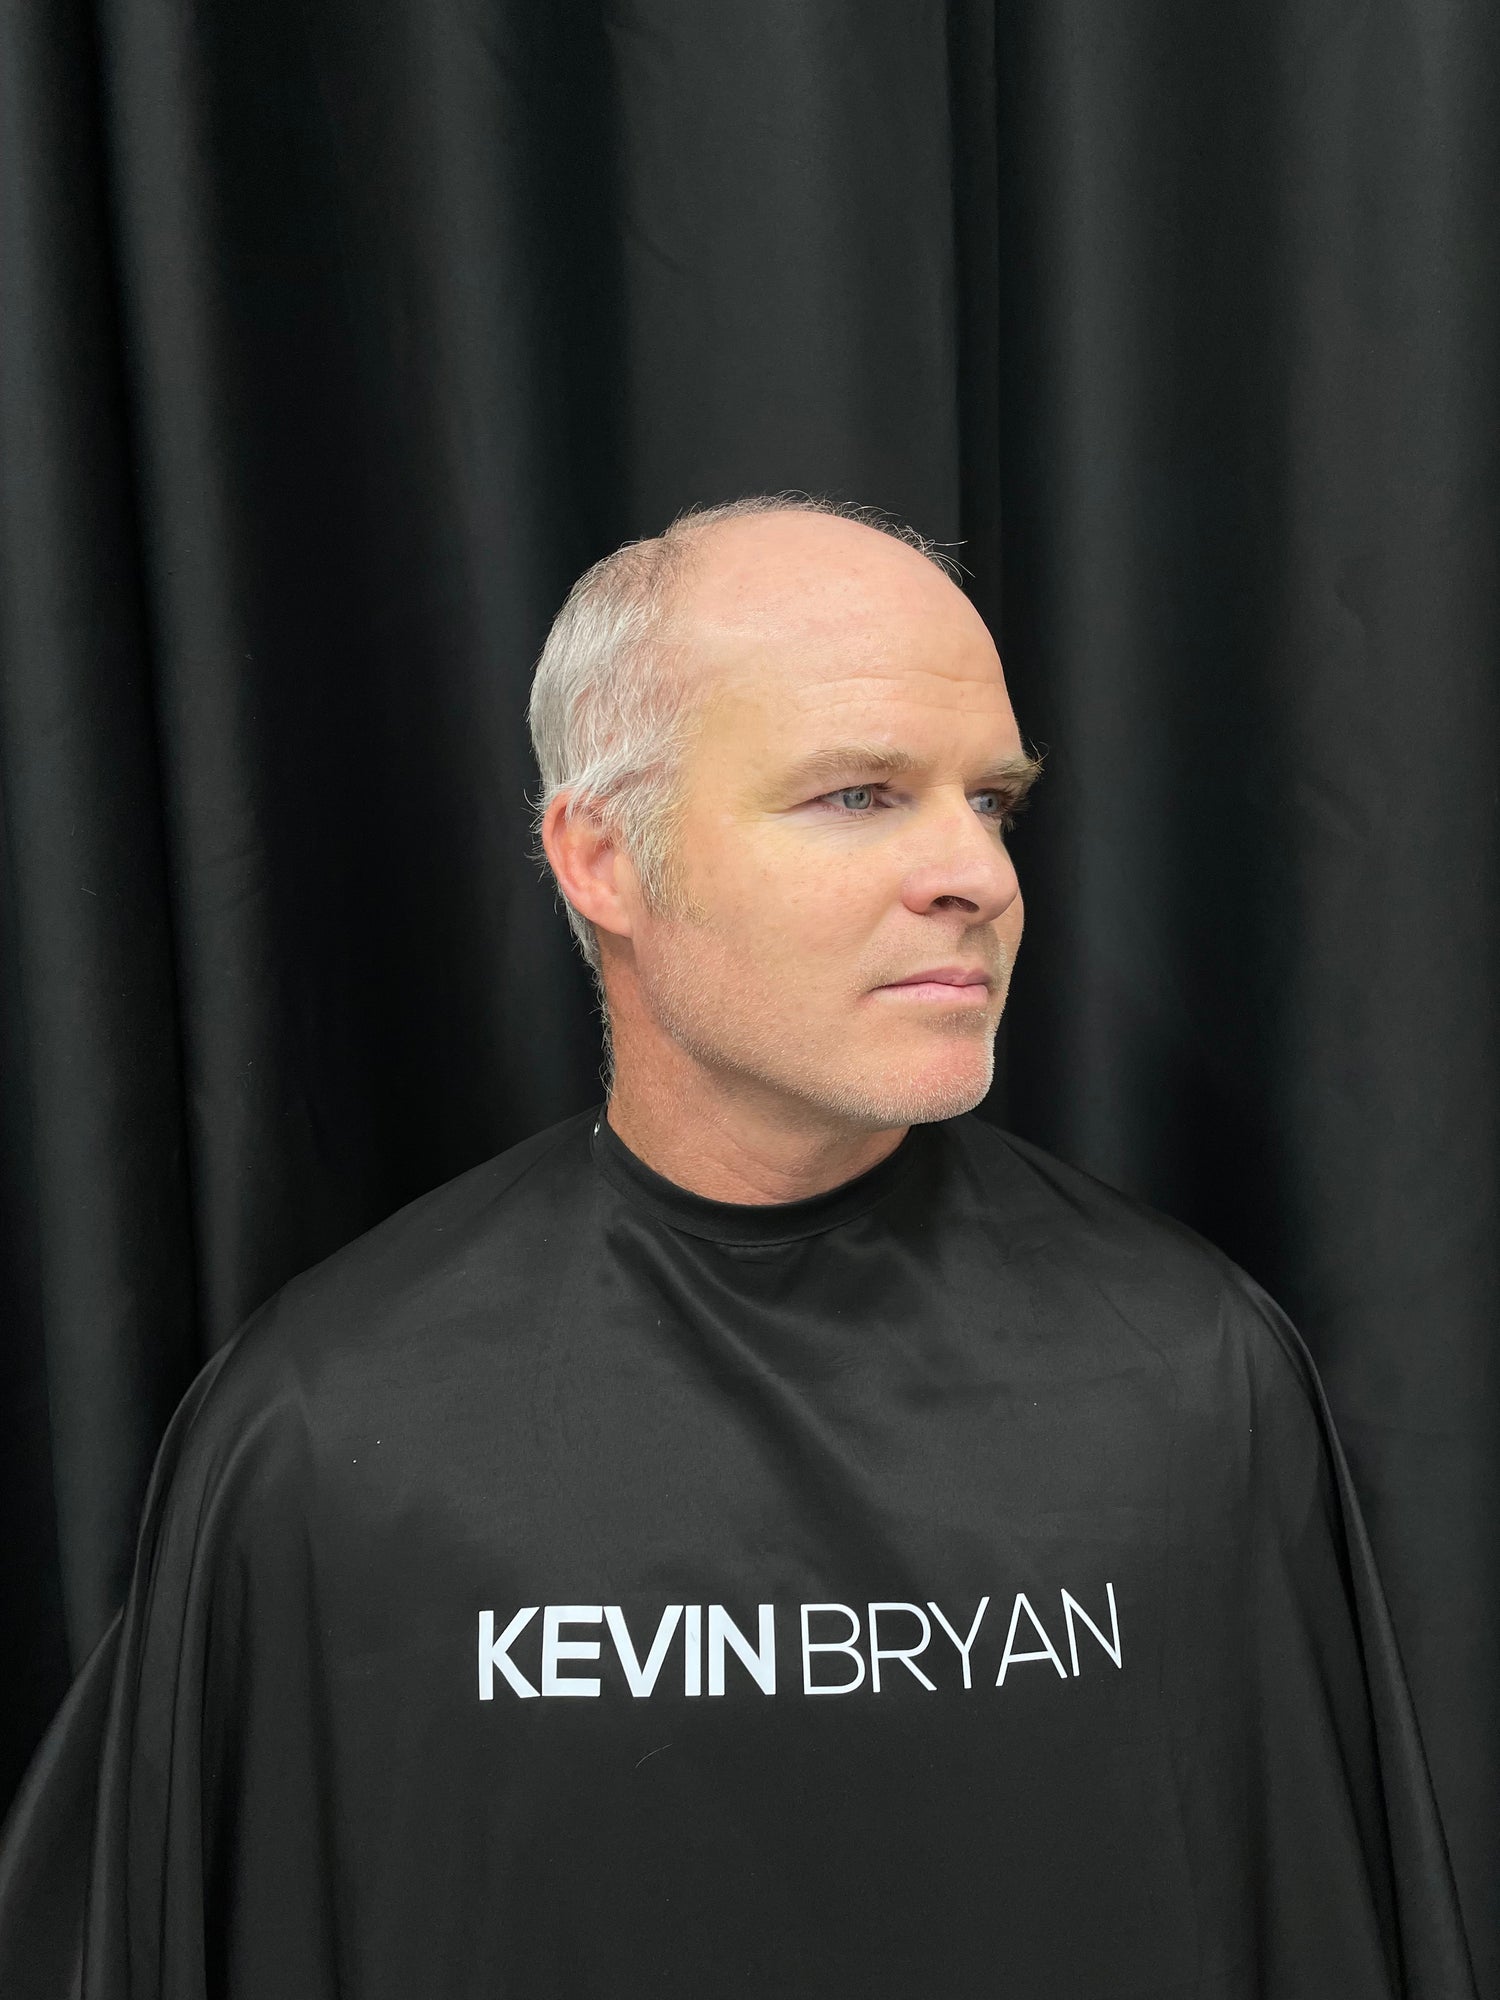 client before image with hair loss